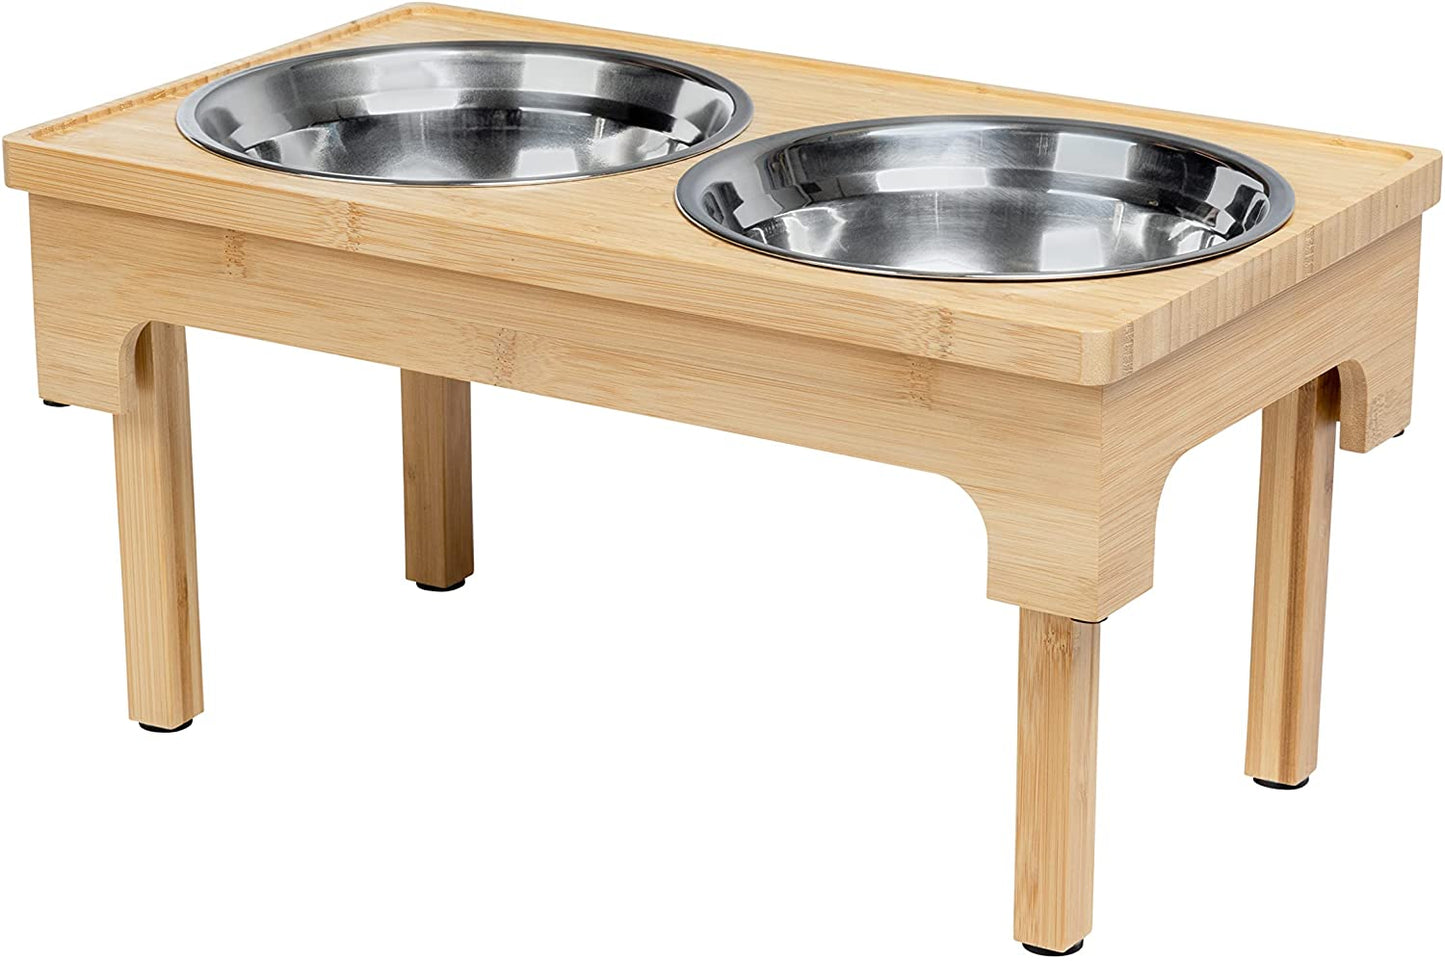 Bamboo Elevated Dog Bowls, Adjustable to 3", 8", and 12" Height